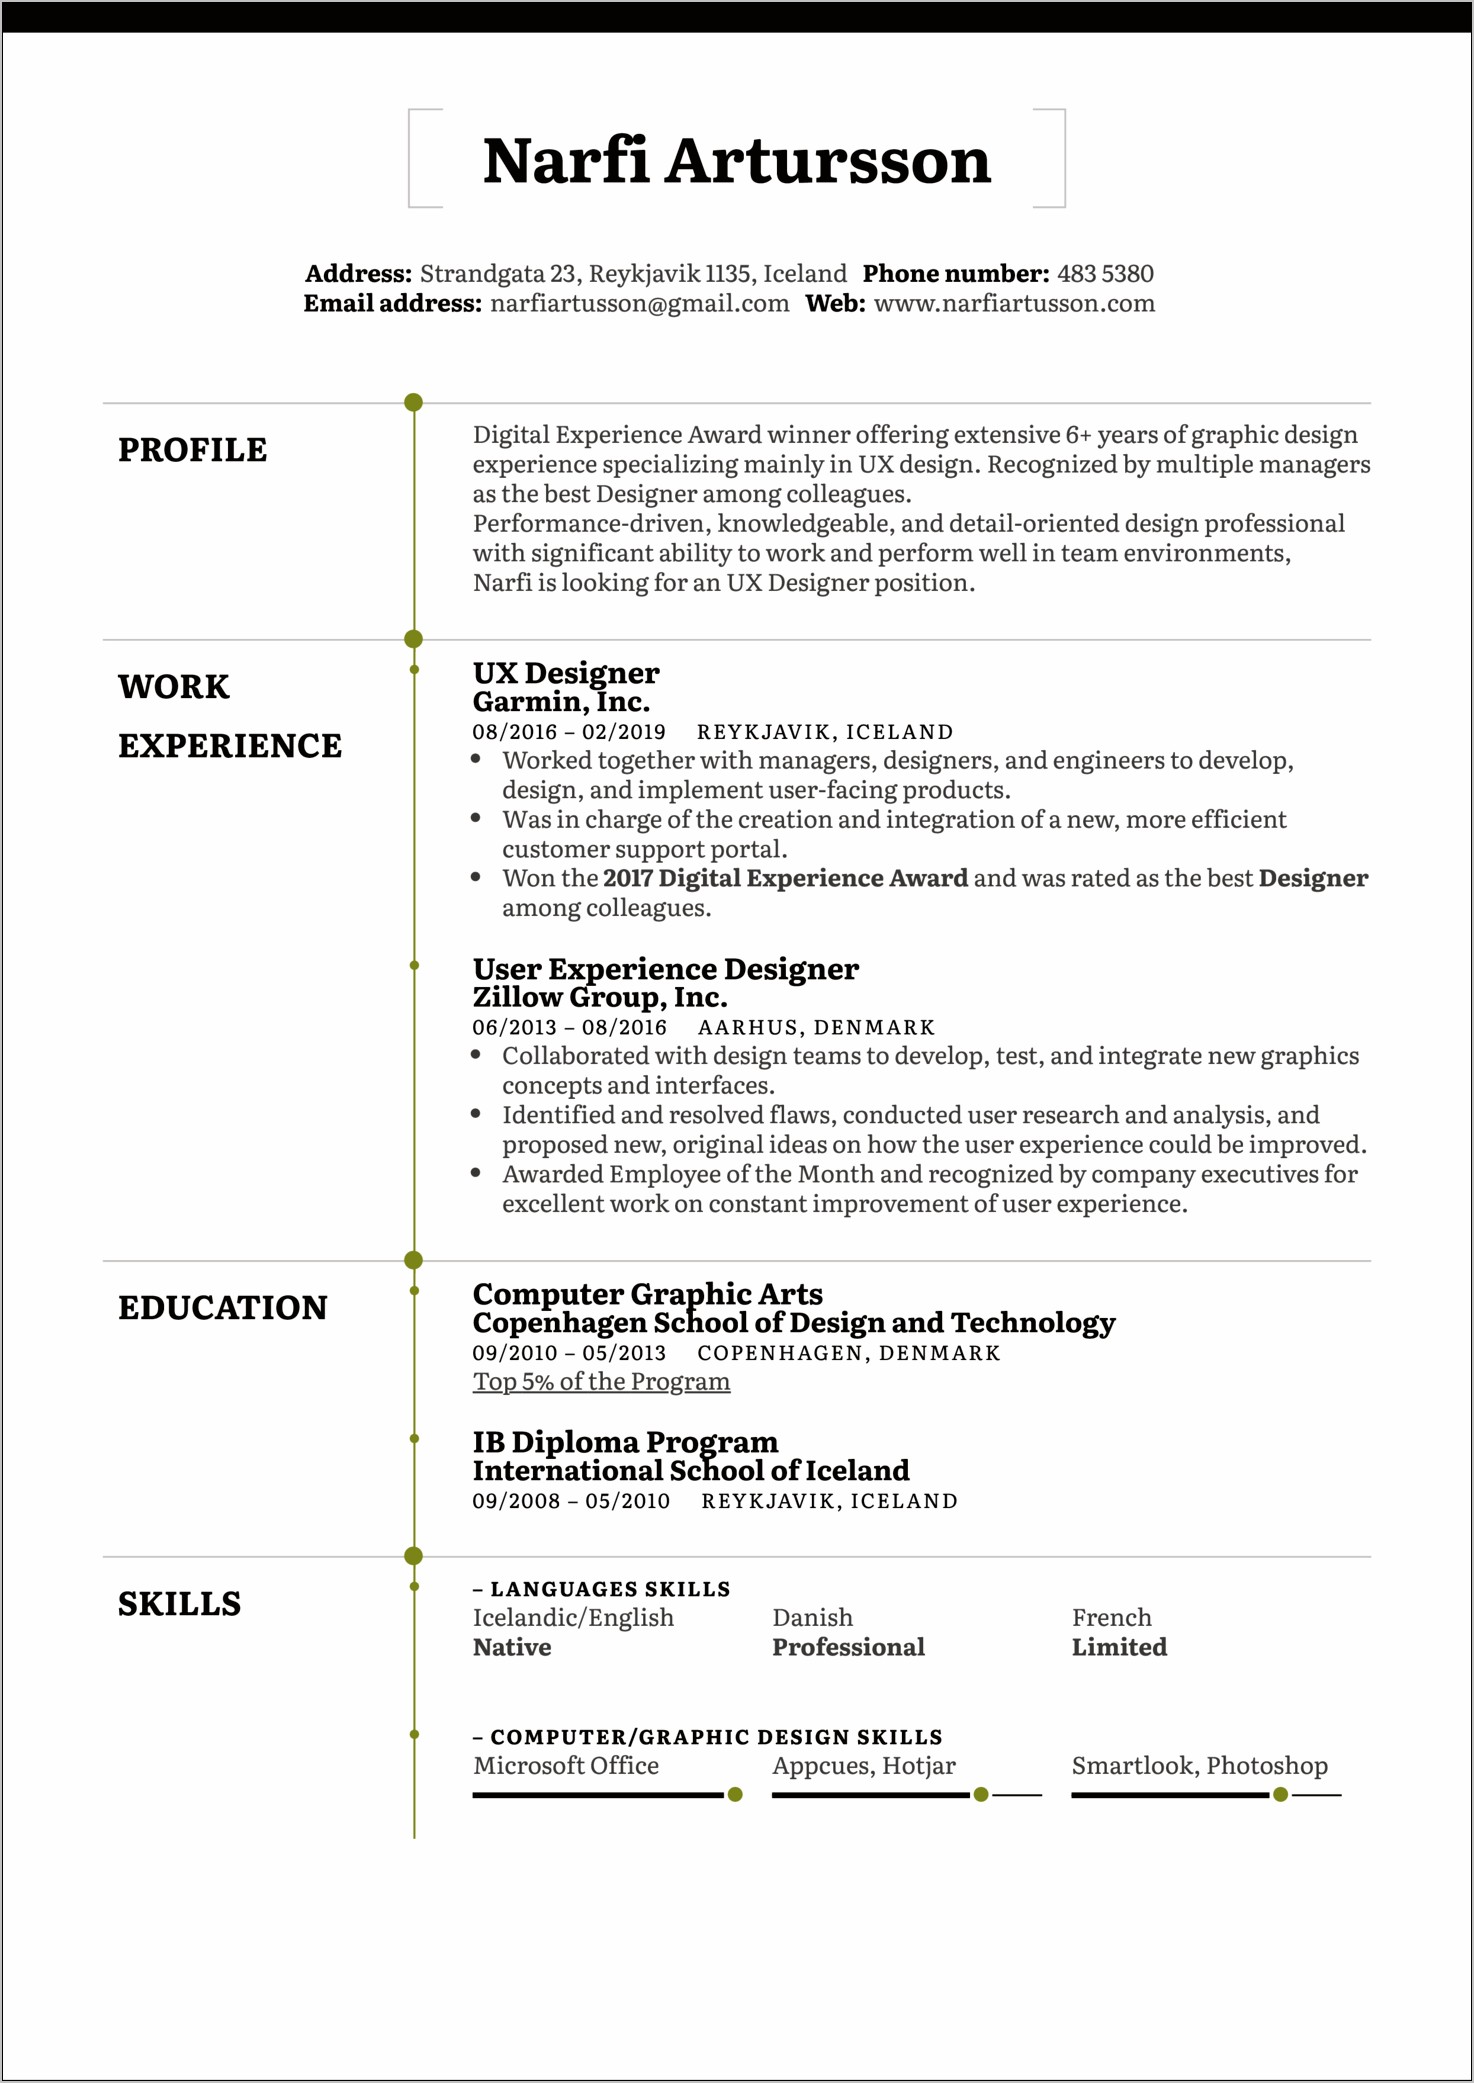 Resume Objective For Art Director